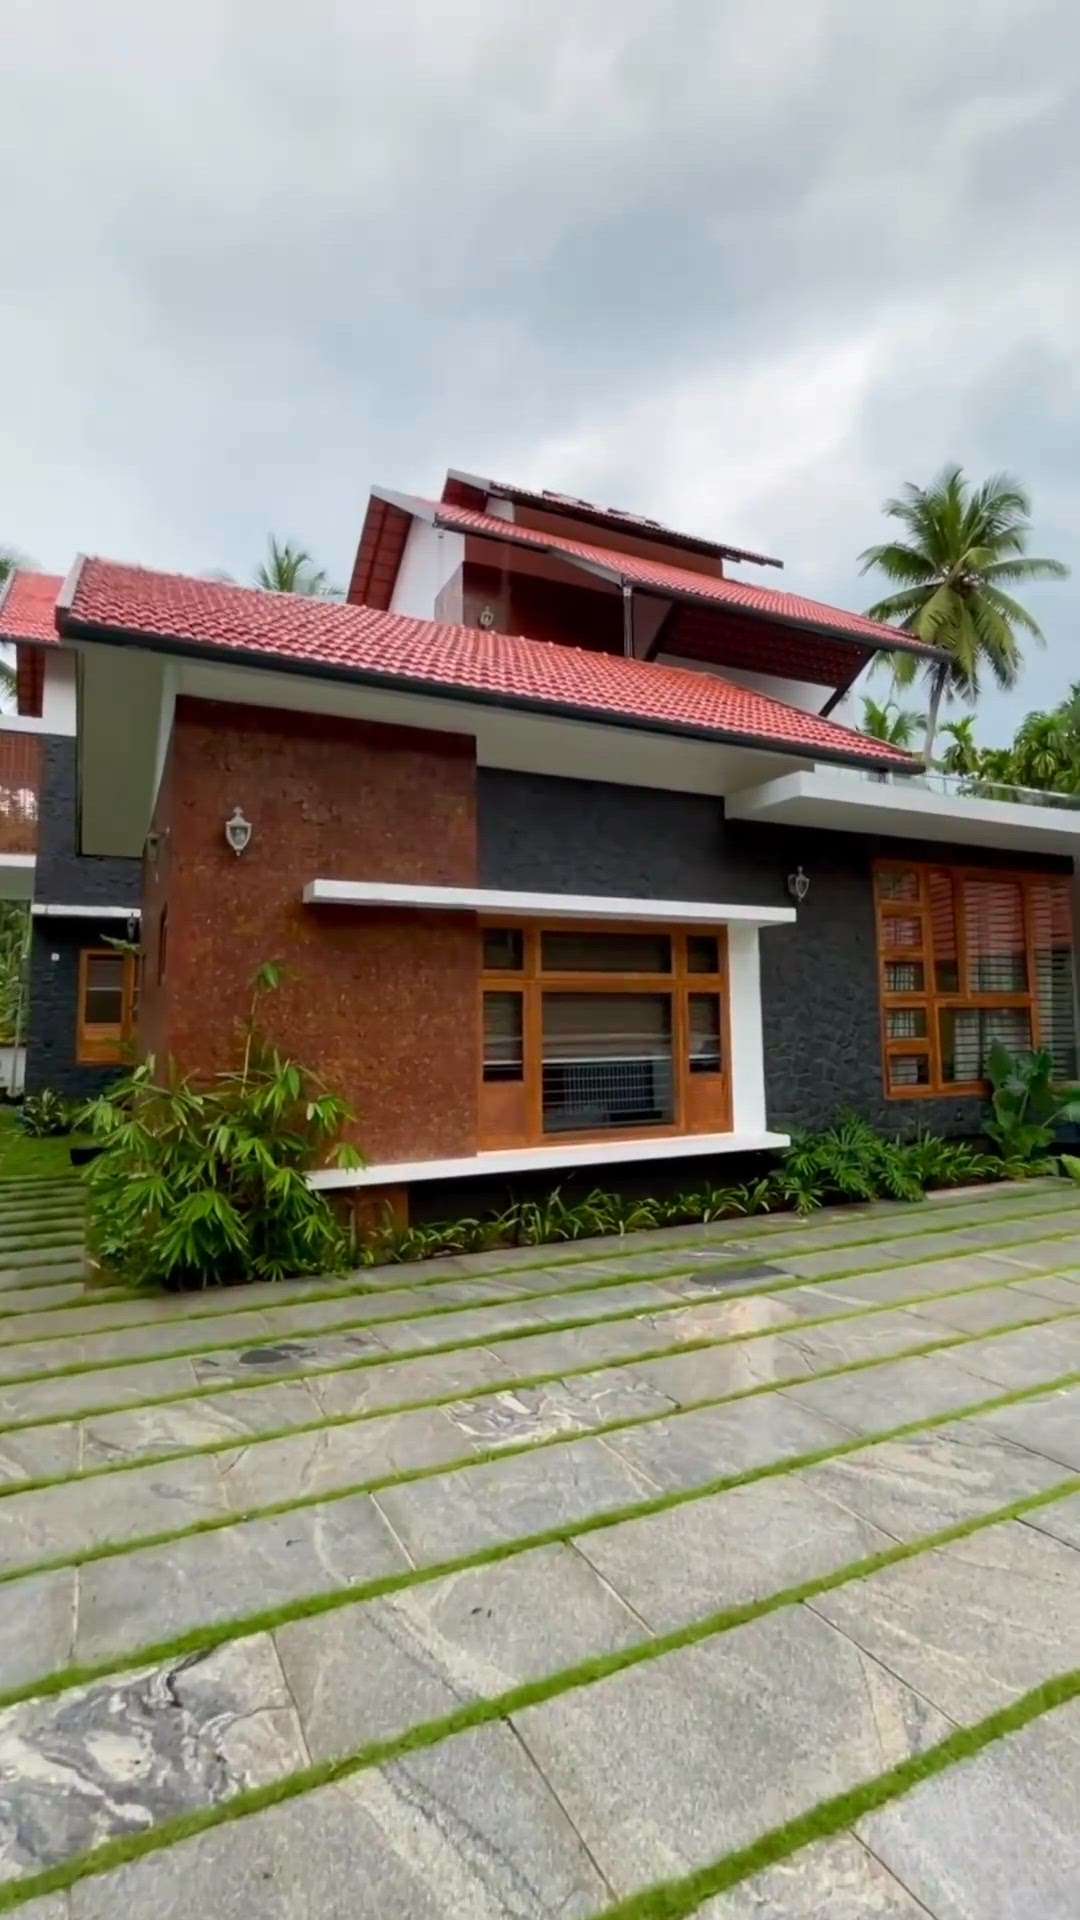 kolo.kerala TROPICAL ARCHITECTURE #

Credits: @uruconsulting_llp

Kolo - India's Largest Home Construction Community

#residence #house #home #tropicalhouse #before&after #courtyard #staircase #home #keralahomes #budgethome #tropicalarchitecture #. #landscapedesign #insideoutside #spaces #instahomes #keralahomes #architecture #homedecor #interiordesign #house #indoorplants #greenhome #decor #artificialgrass